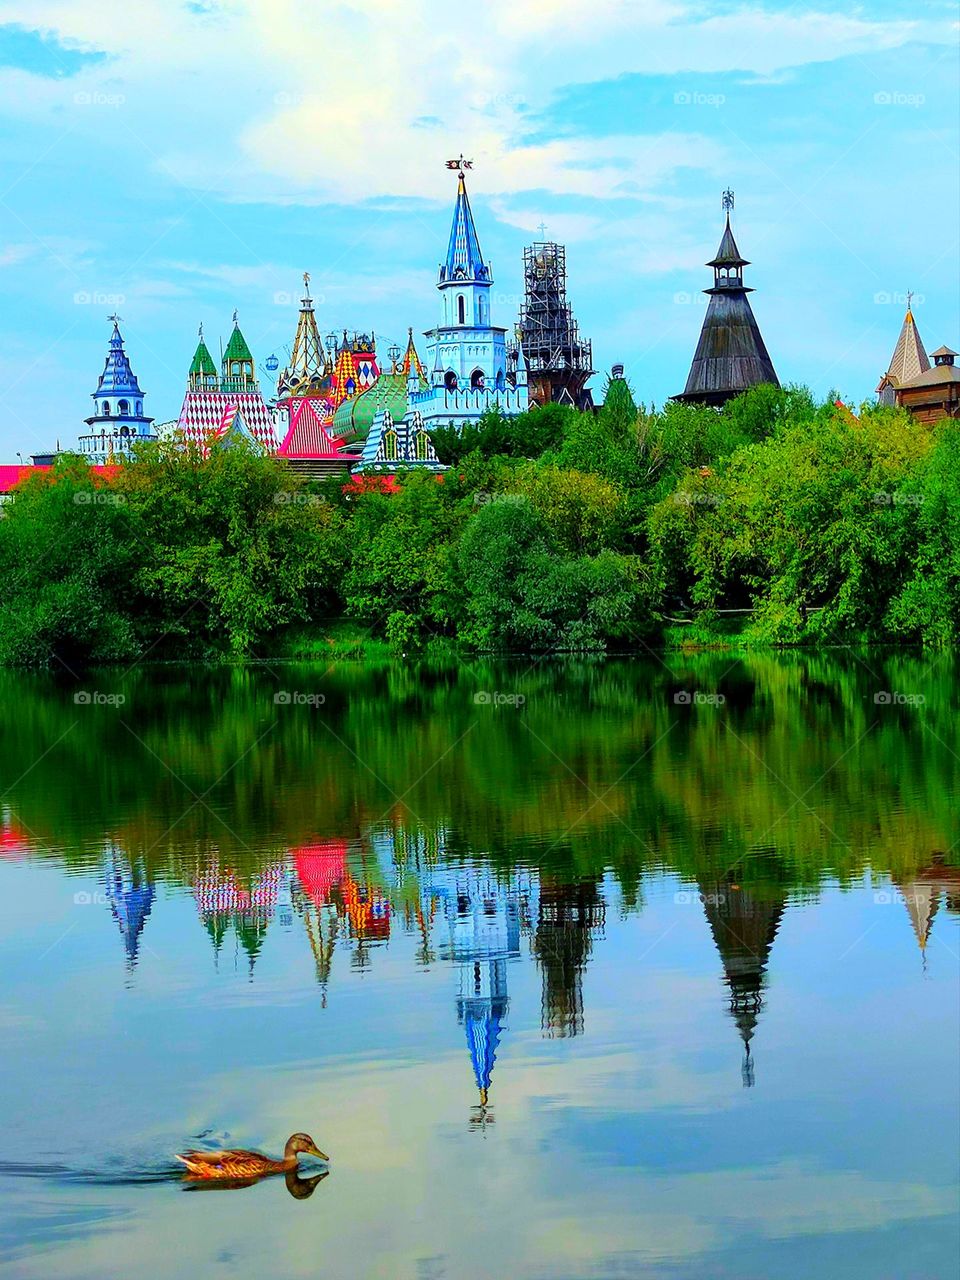 The domes of the towers and green trees are reflected in the water.  A duck is swimming in the foreground